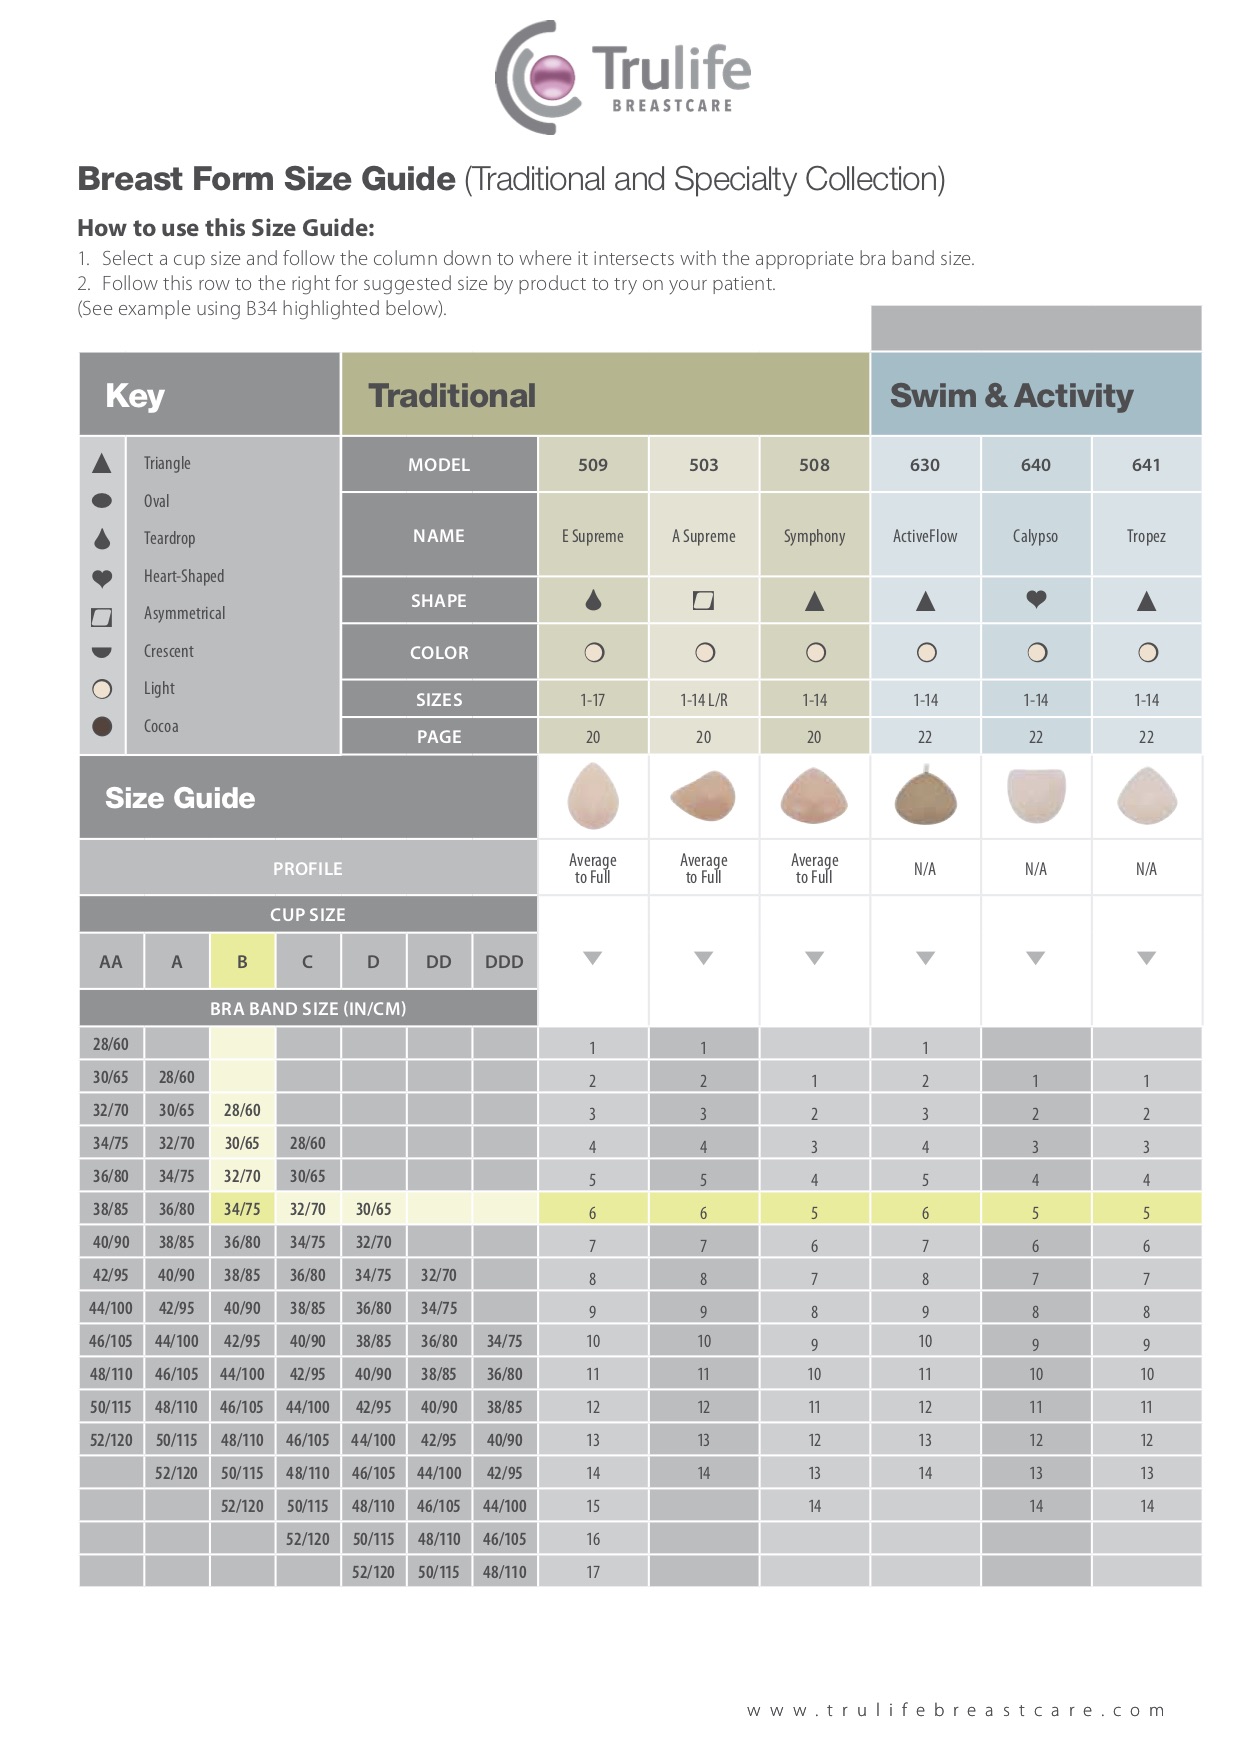 Trulife Breast Form Size Chart | Post-Surgery, Leisure ...